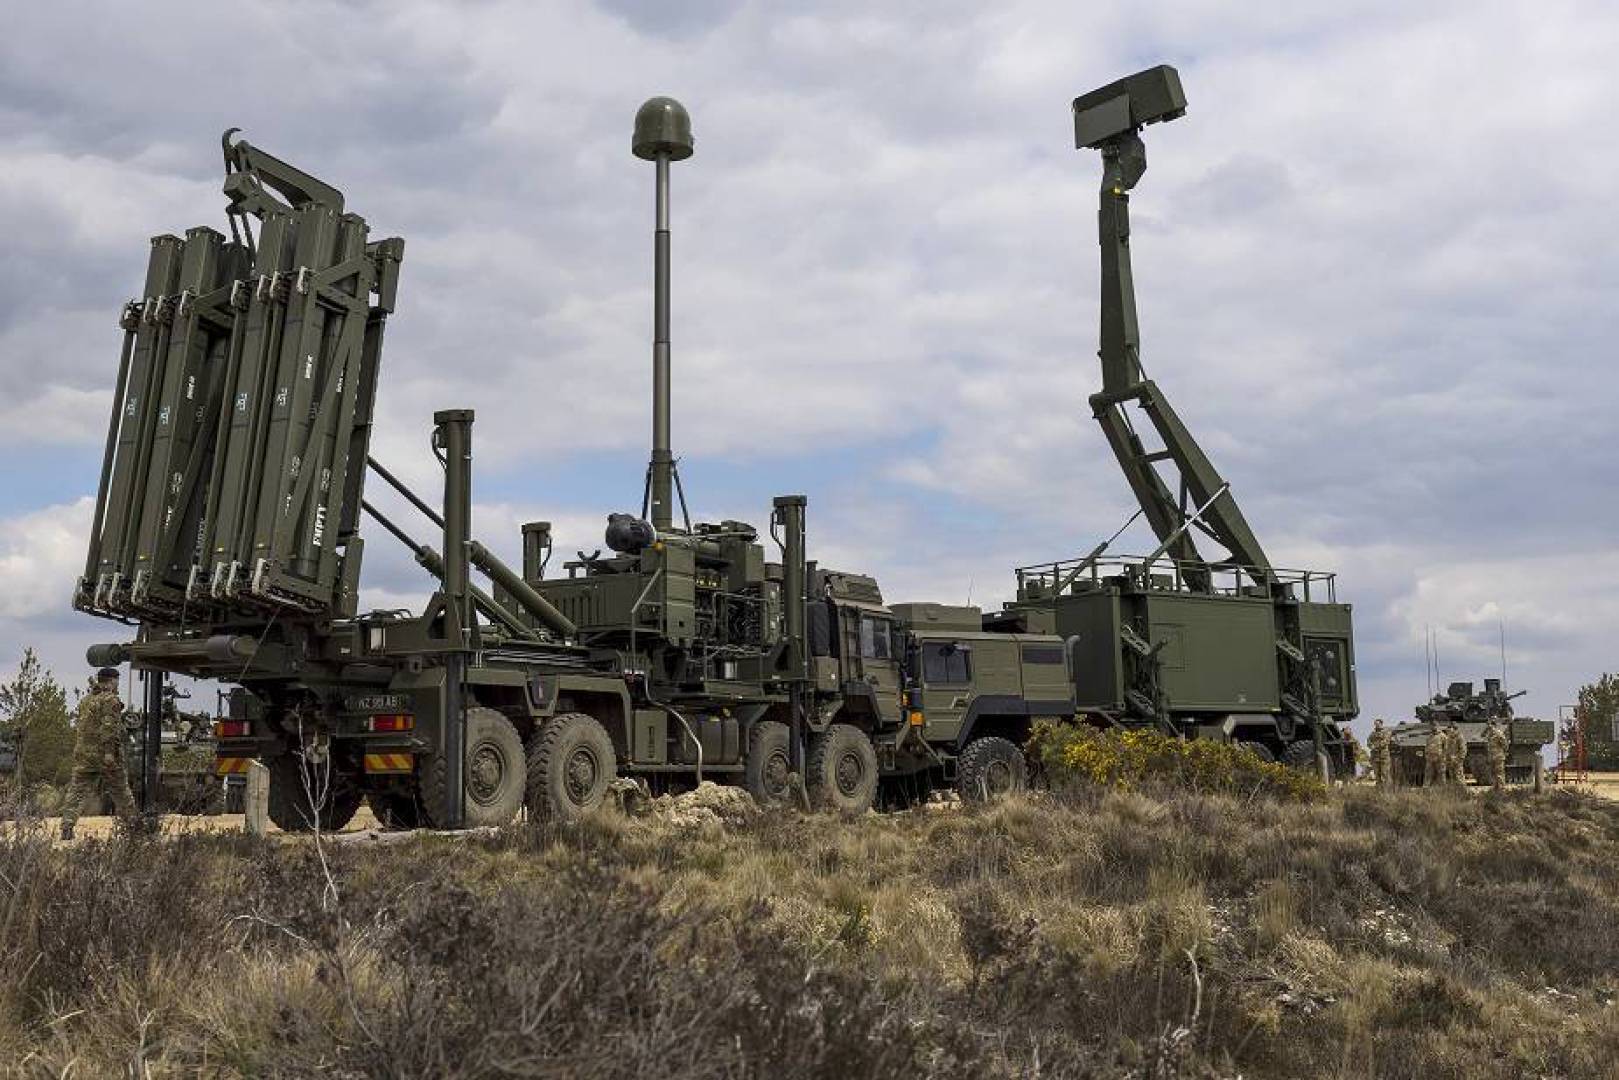 UK Sky Sabre air defense missile system deployed in Poland to protect its airspace 925 001 418140 highres1704701104